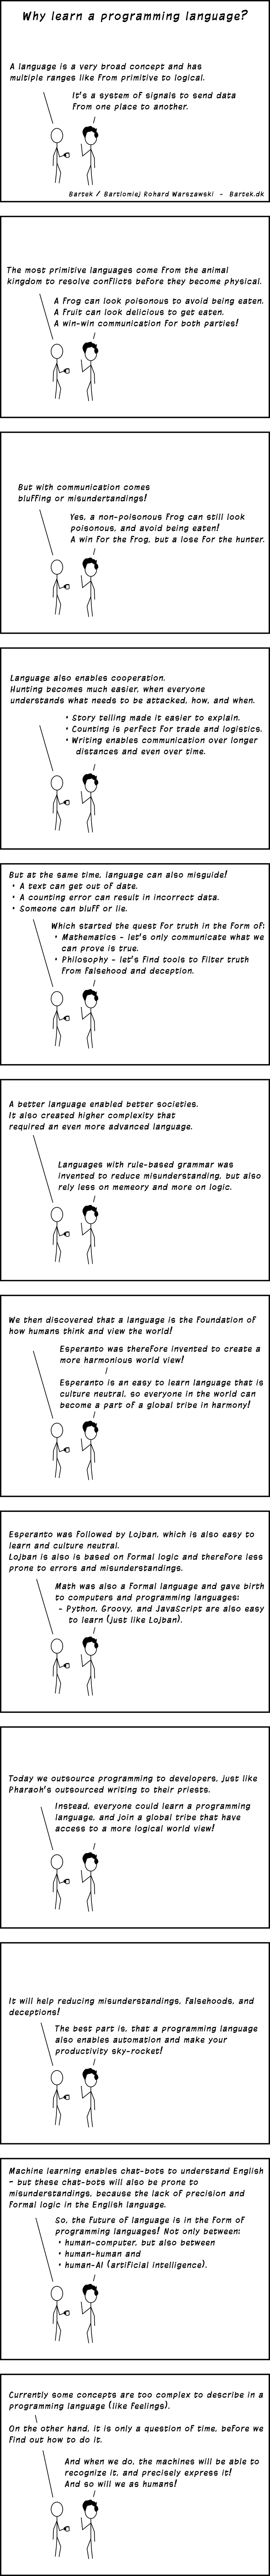 comic: Why learn a programming language?